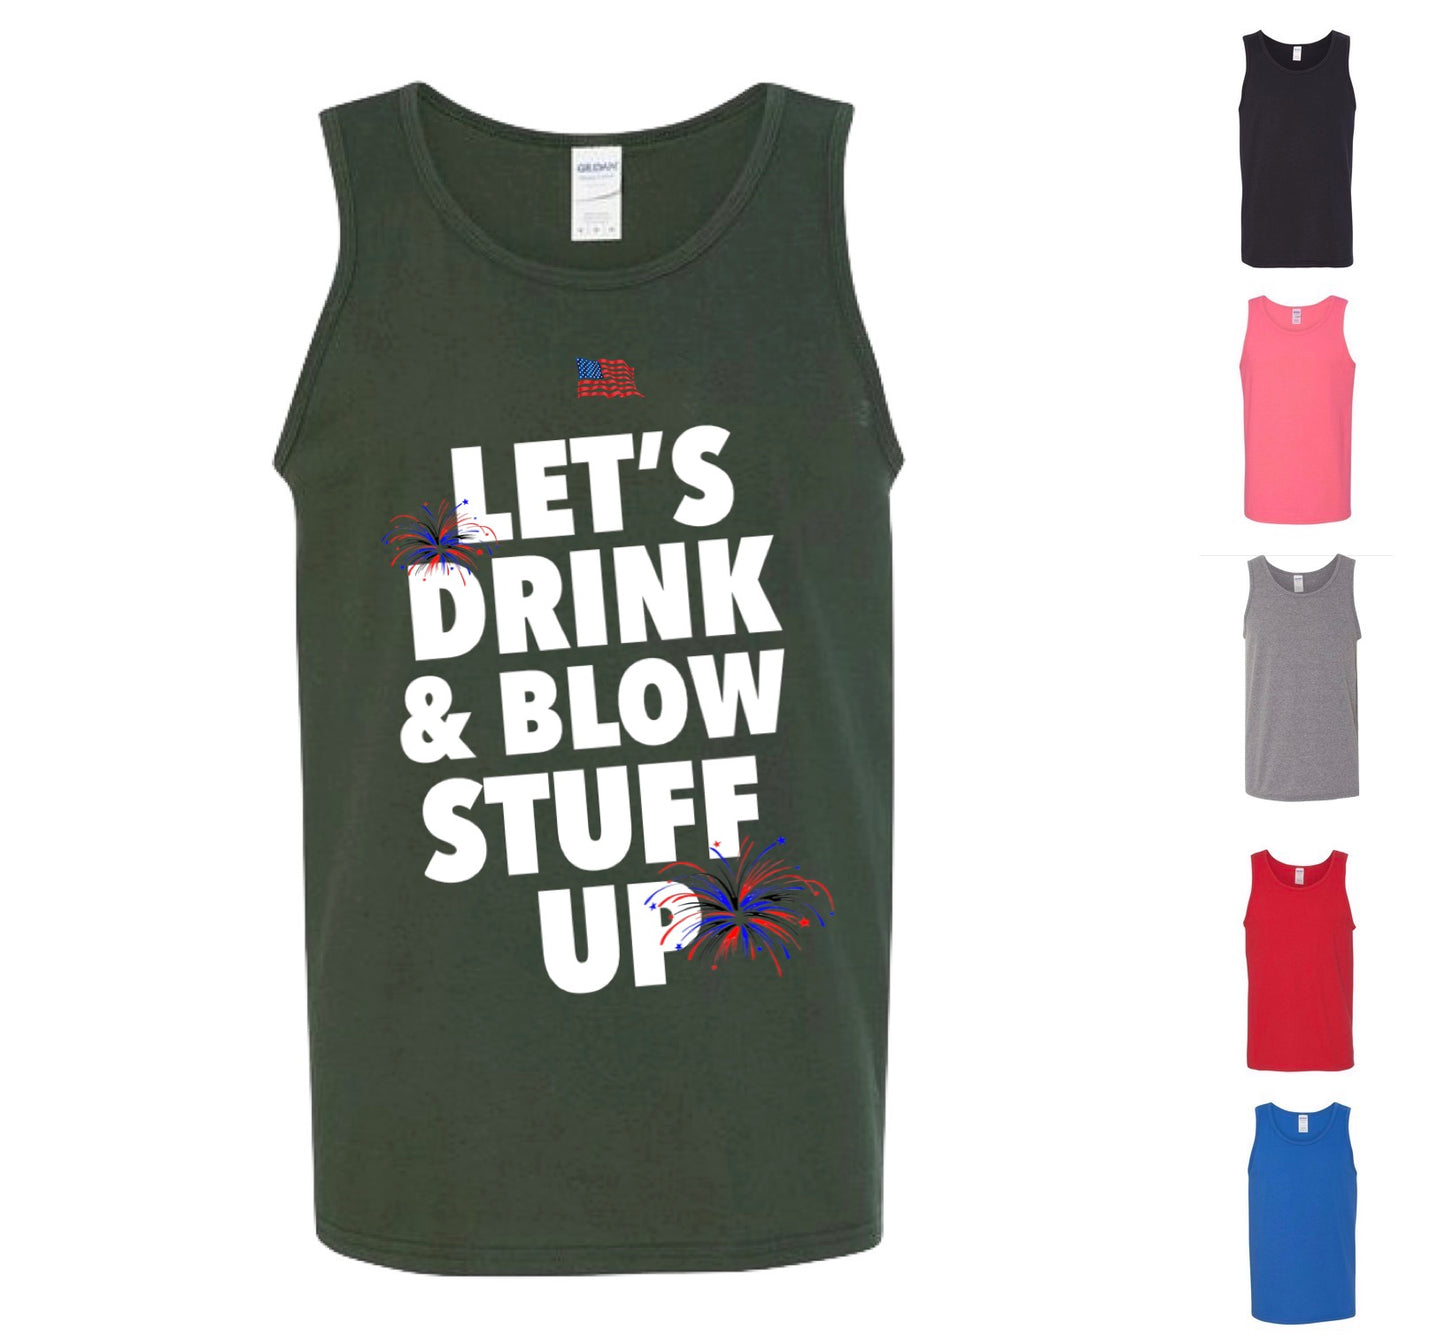 Let's Drink & Blow Stuff Up! (Free Shipping)